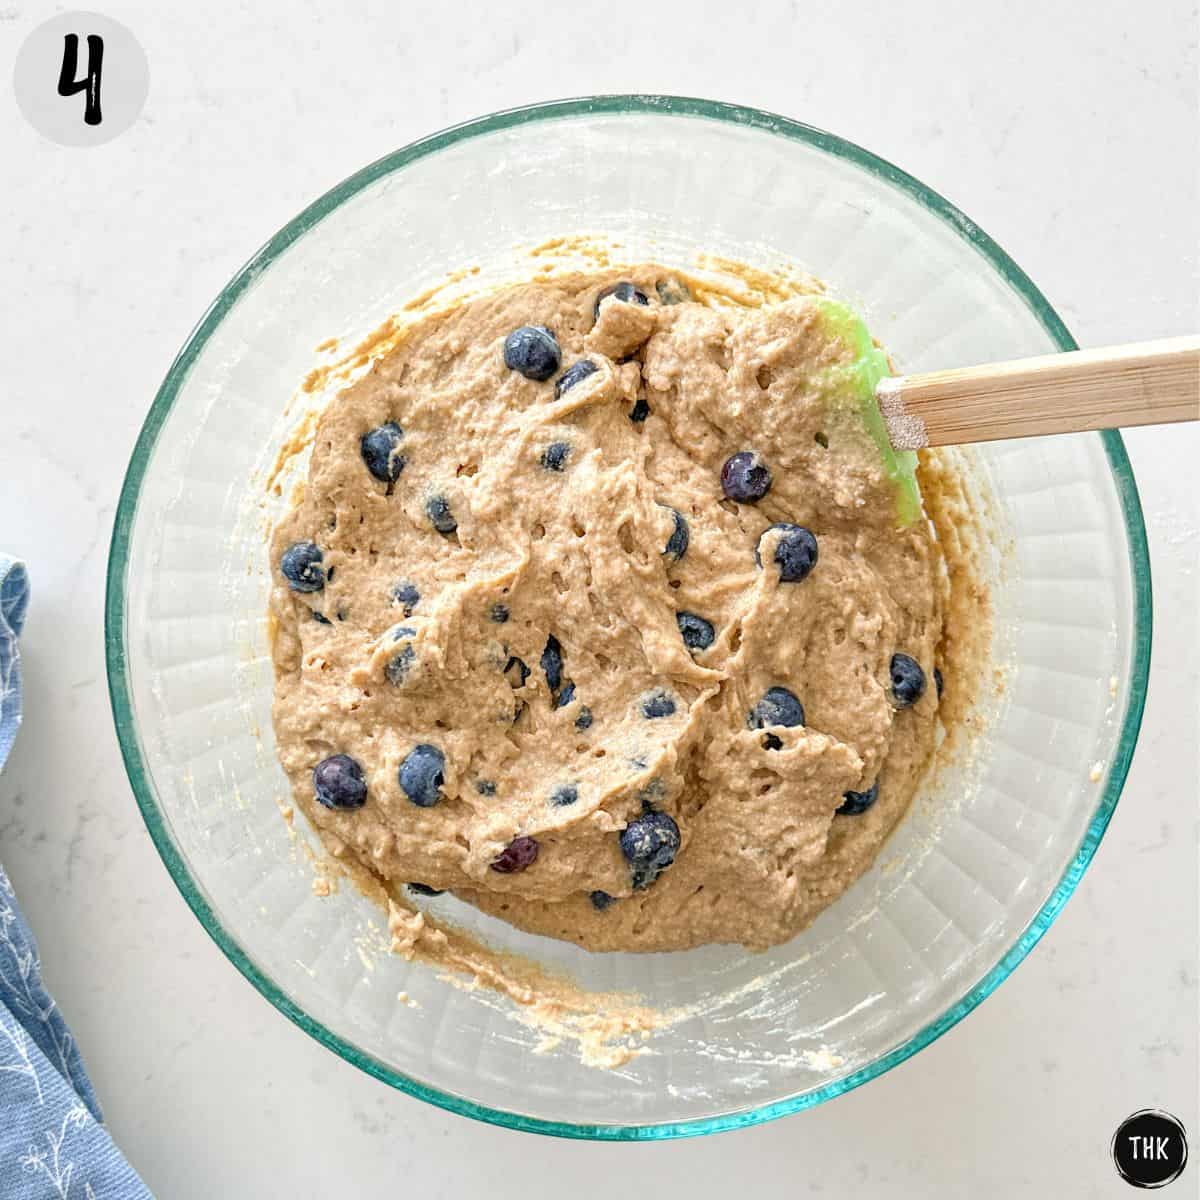 Banana lentil muffin batter with blueberries in large bowl.